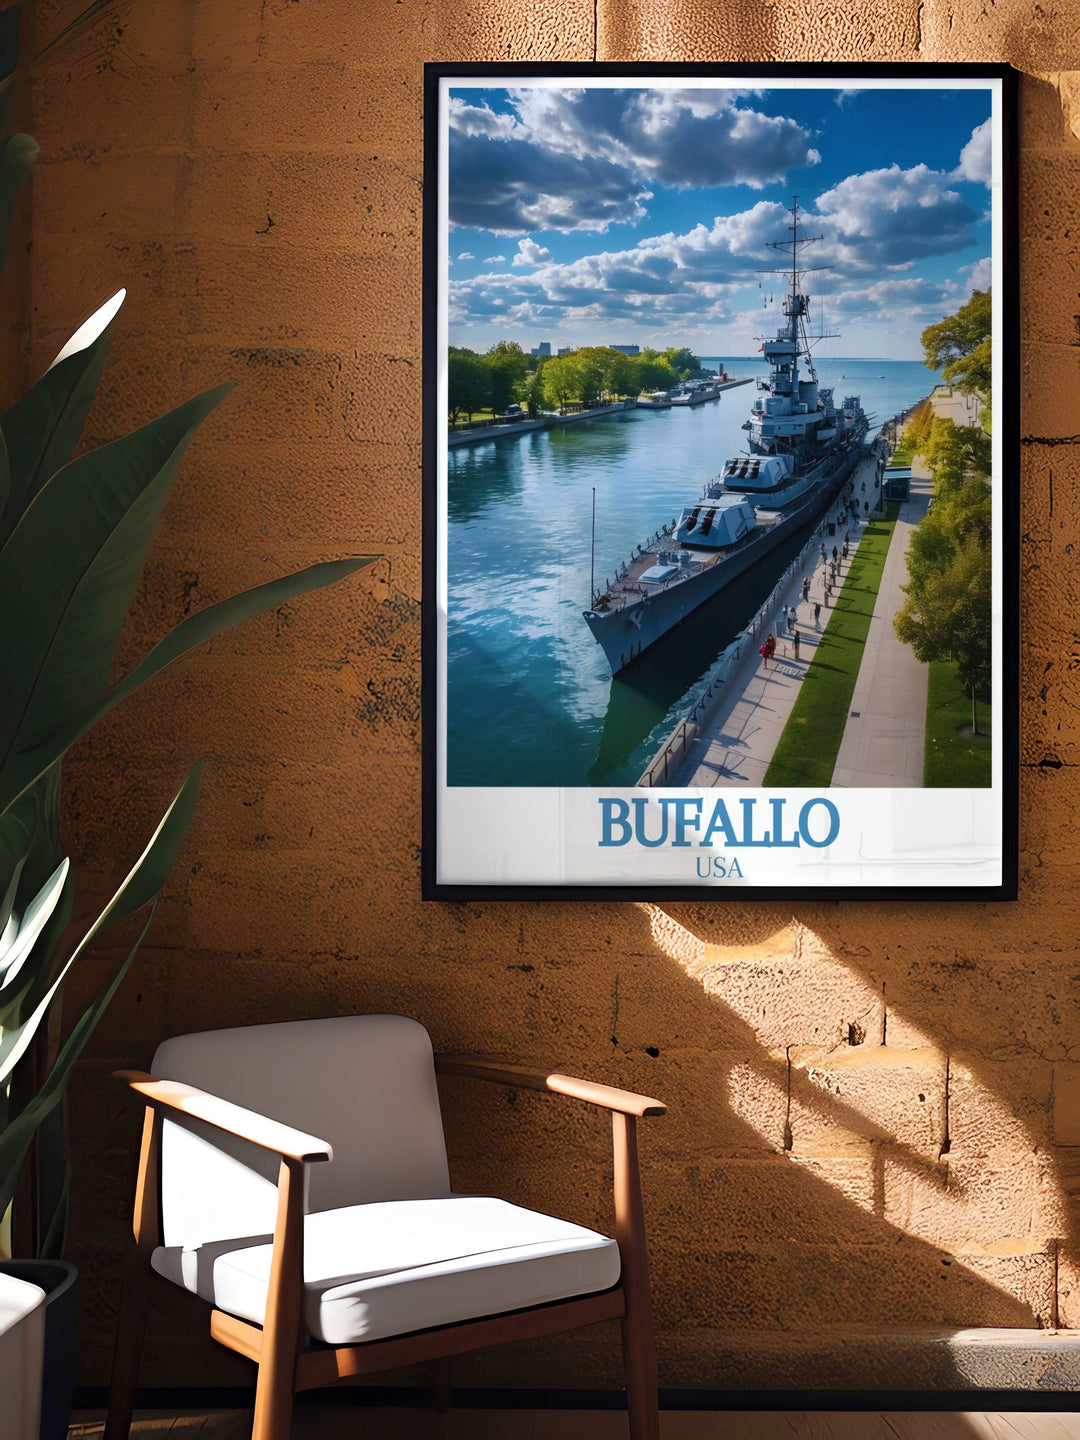 Elegant Buffalo Naval and Military Park home decor prints capturing the essence of Buffalos history and beauty ideal for those who want to bring a touch of Buffalo charm into their living spaces